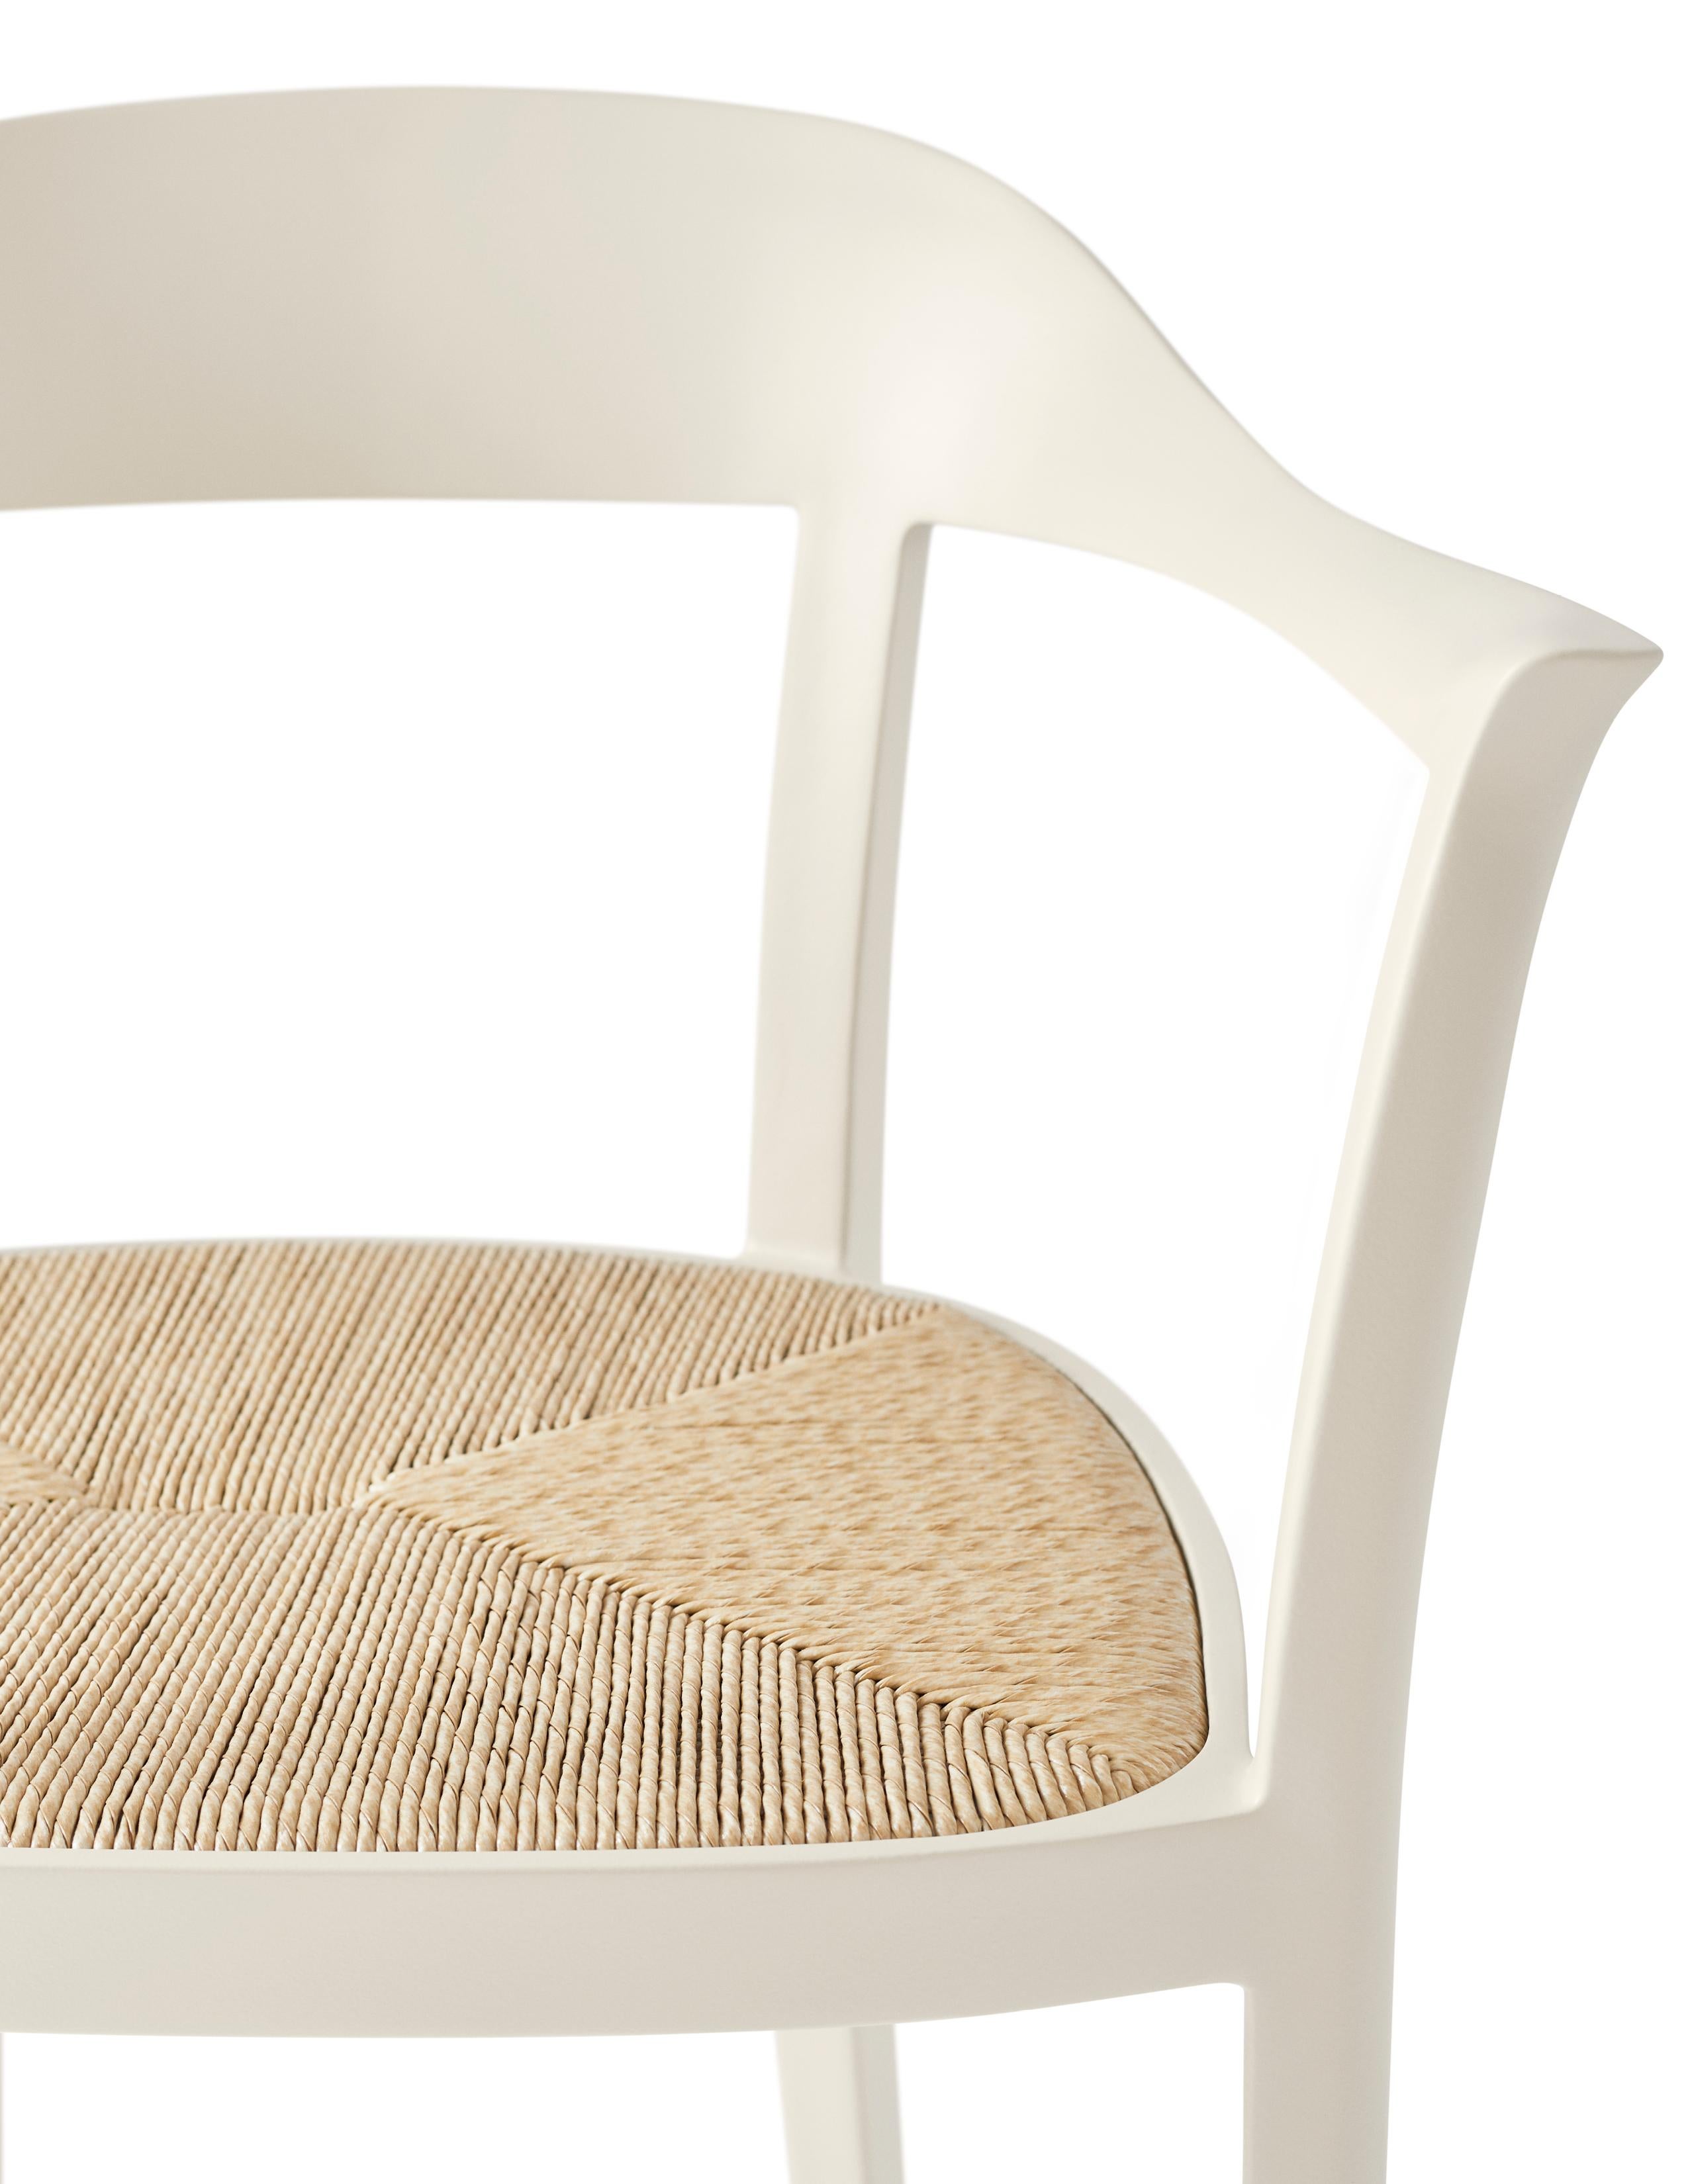 Chesapeake Dining Chair, Pale Grey, Neutral, Woven Rush Seat, Outdoor Garden 3